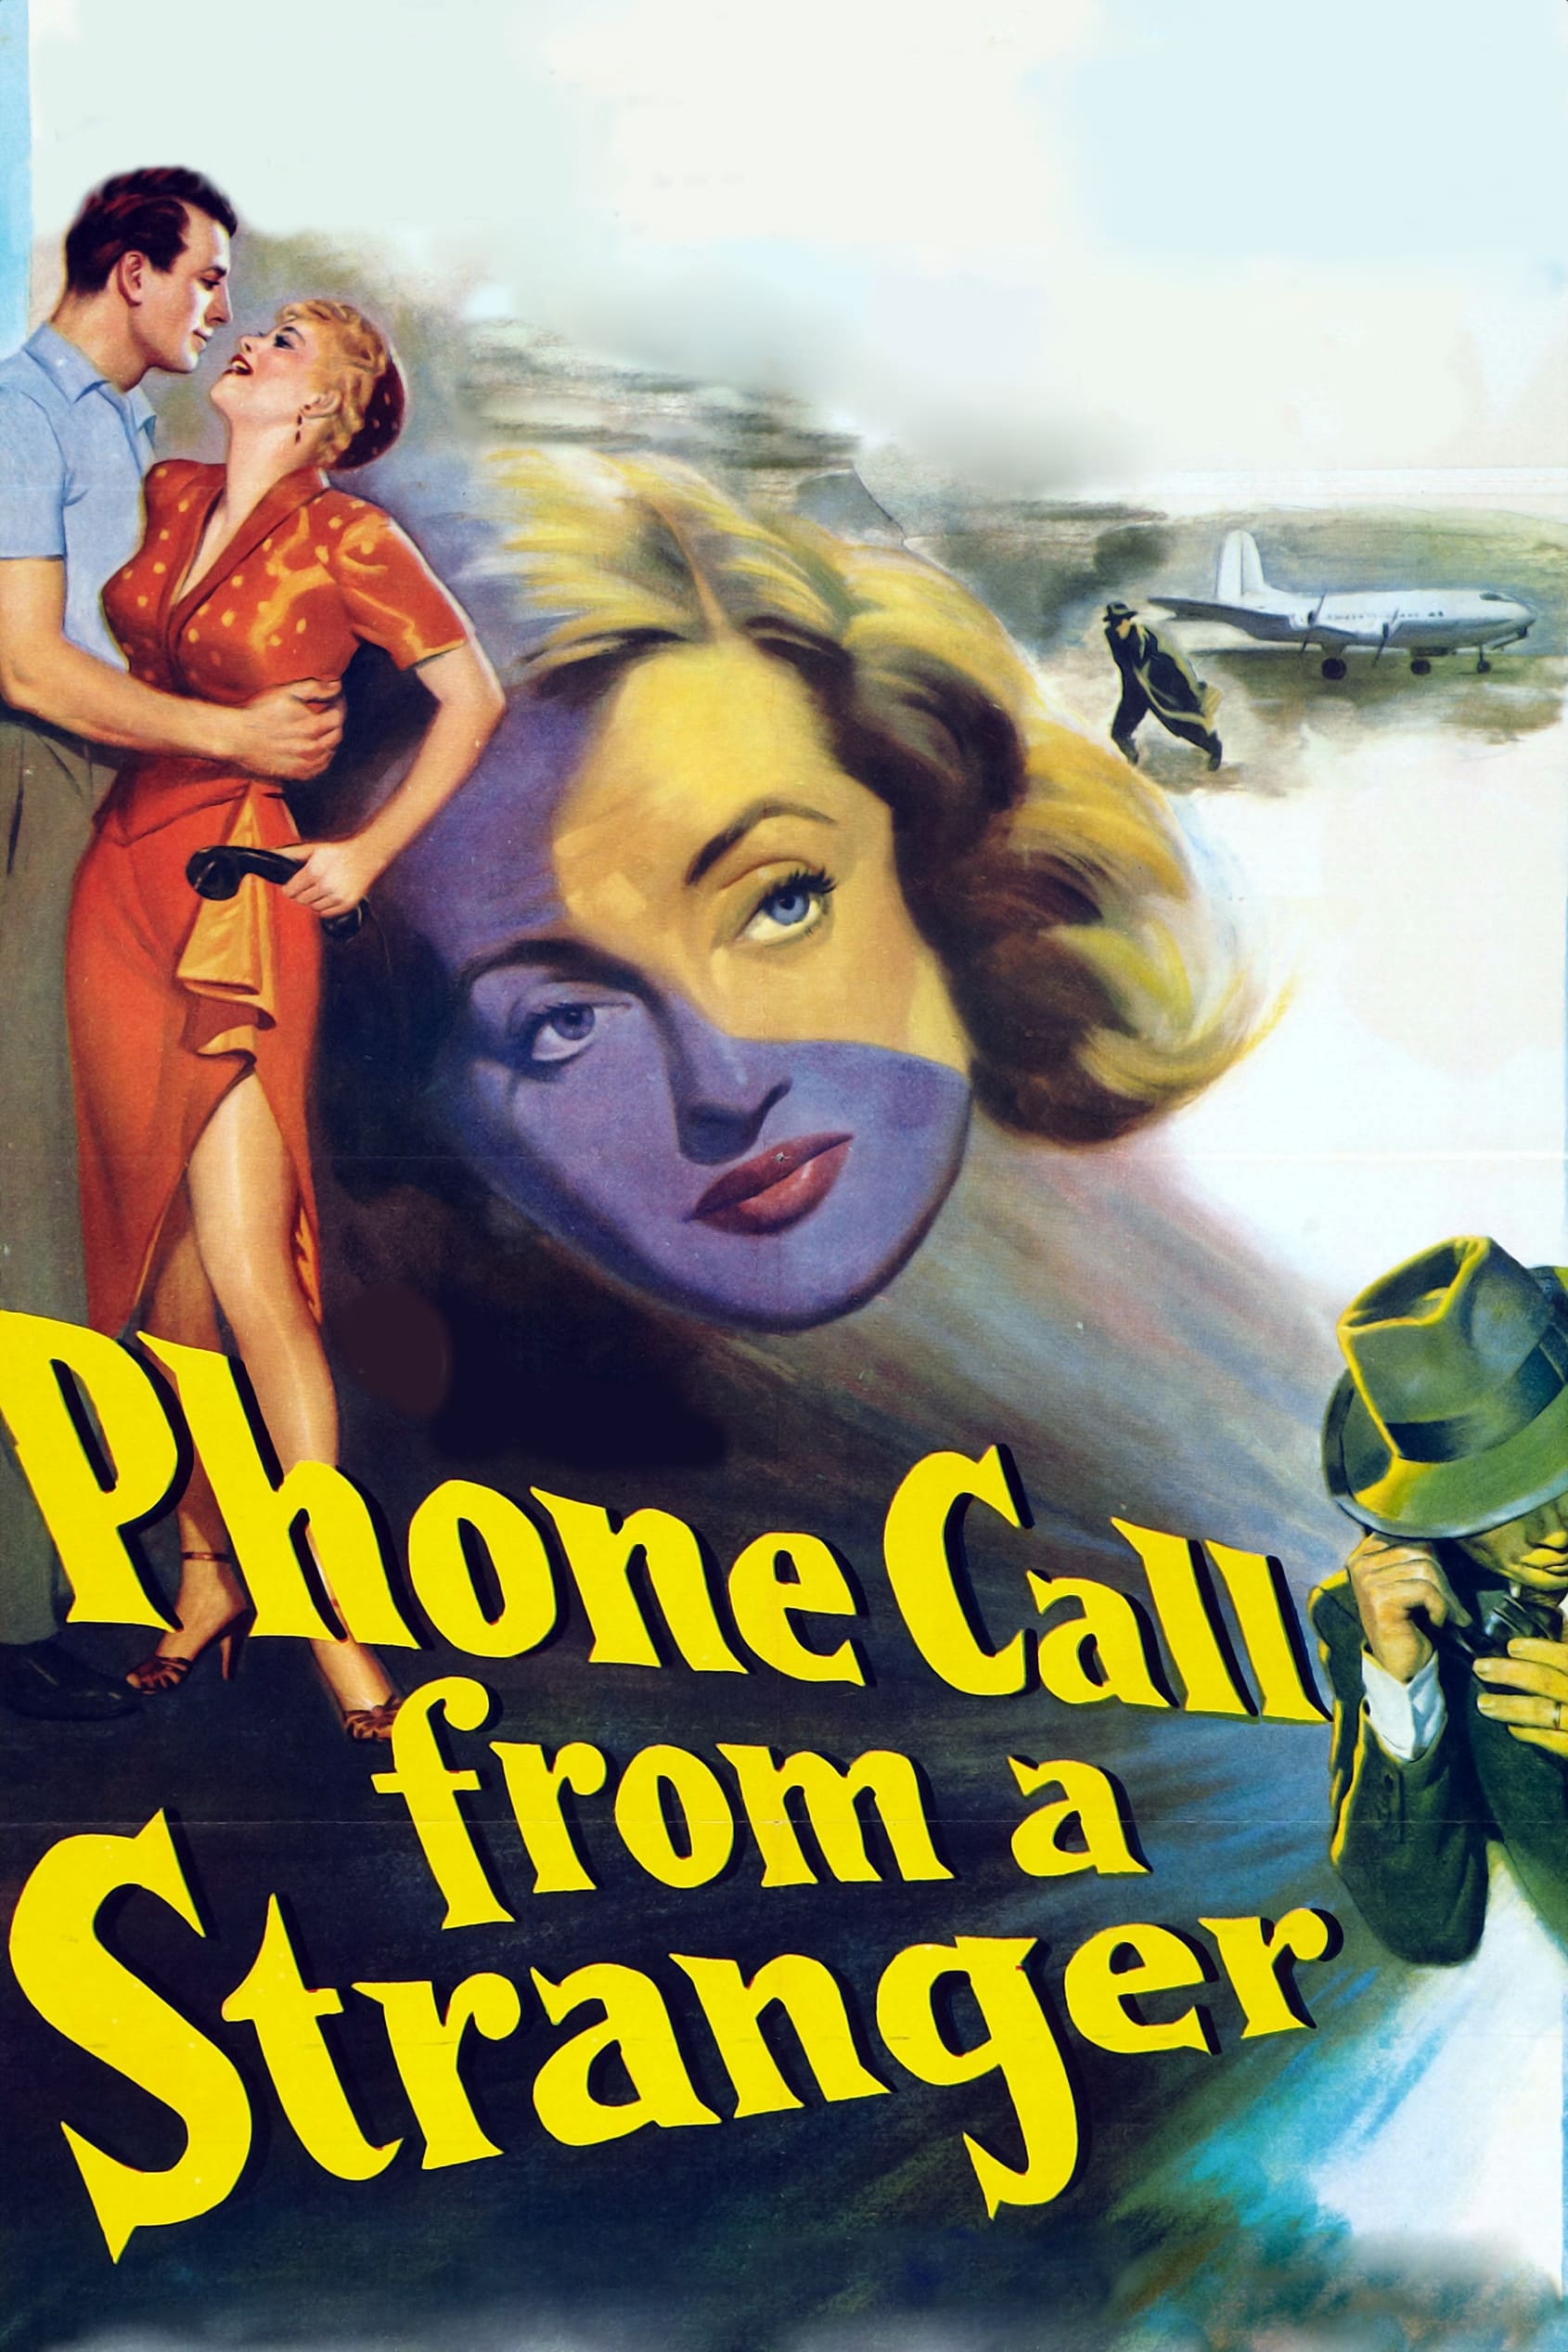 Phone Call from a Stranger (1952)